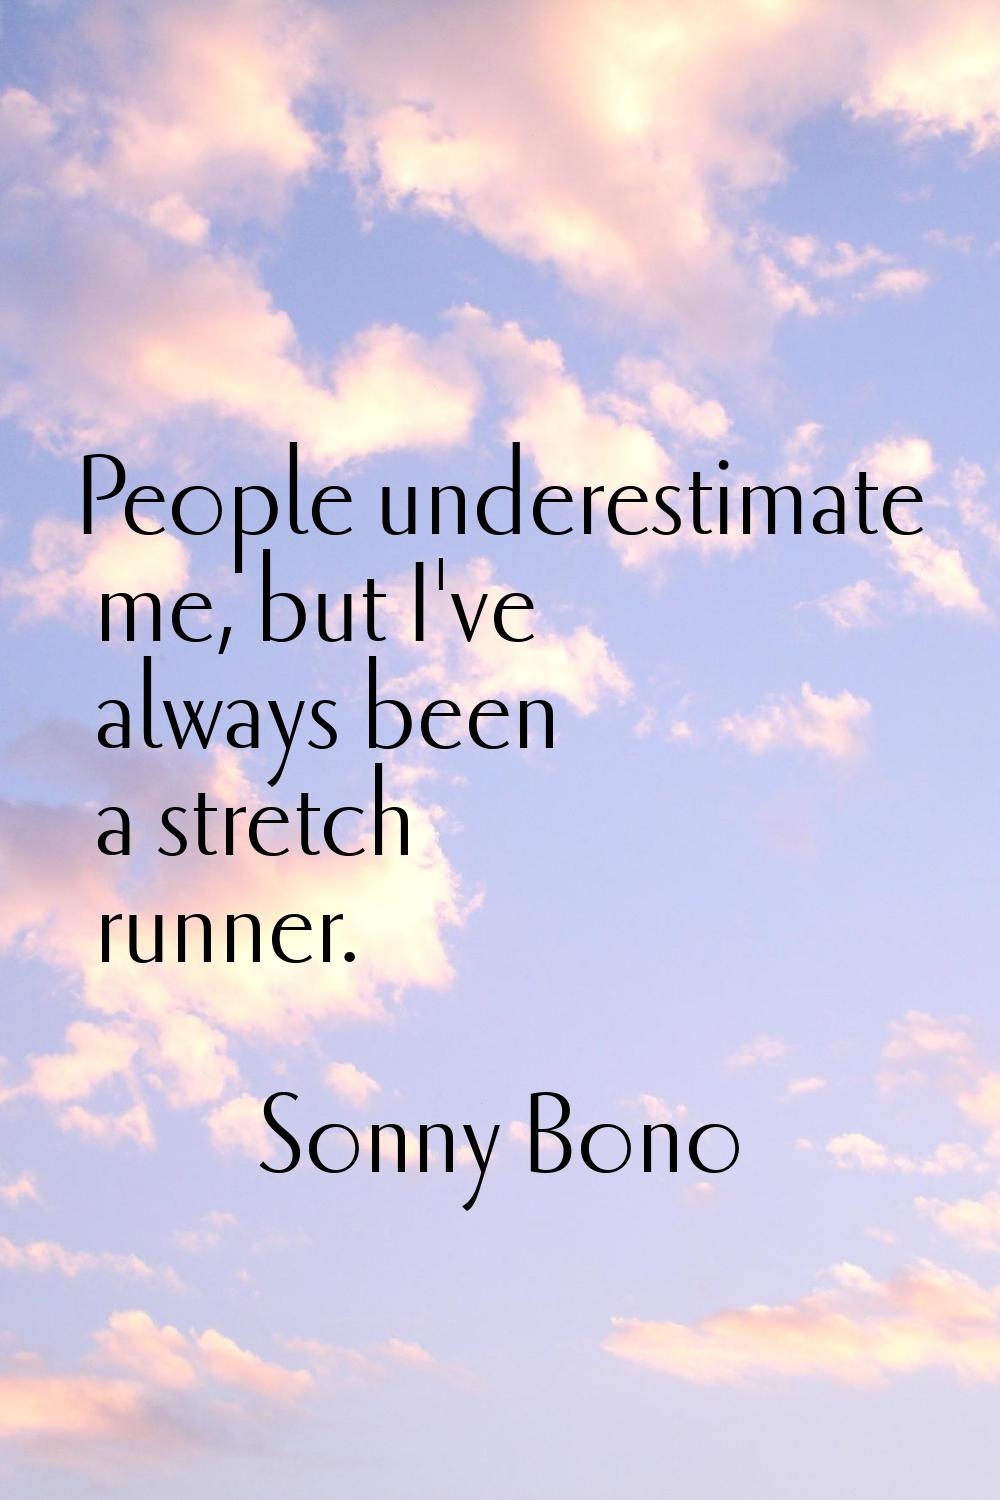 People underestimate me, but I've always been a stretch runner.